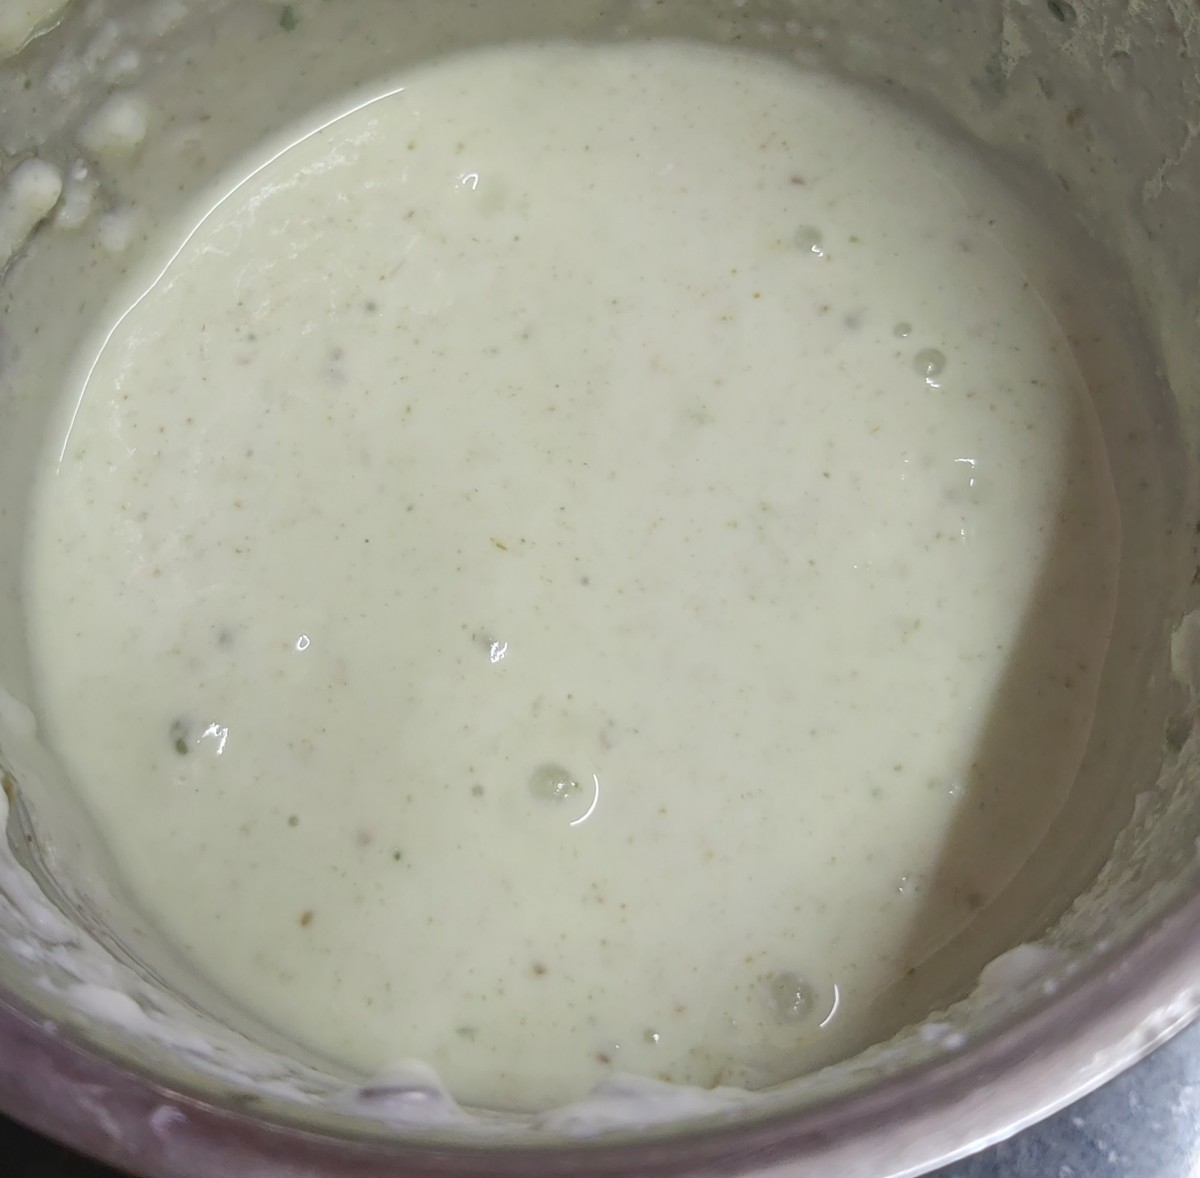 Grind to a smooth, fine and light batter. The consistency of the batter should be medium.